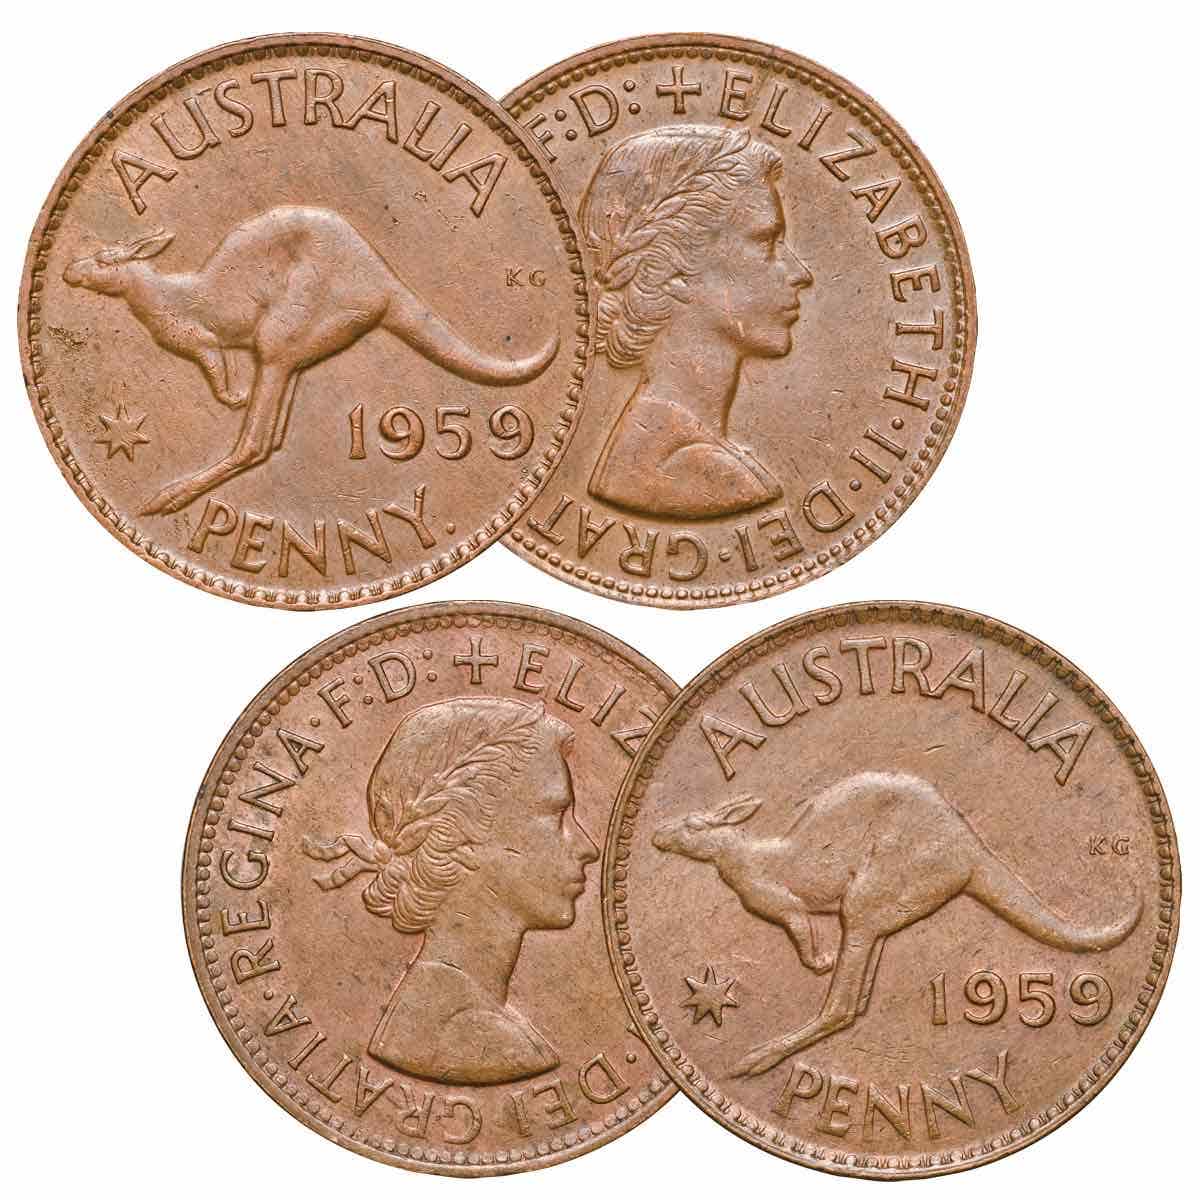 1959 & 1959Y Penny Pair Extremely Fine-about Uncirculated